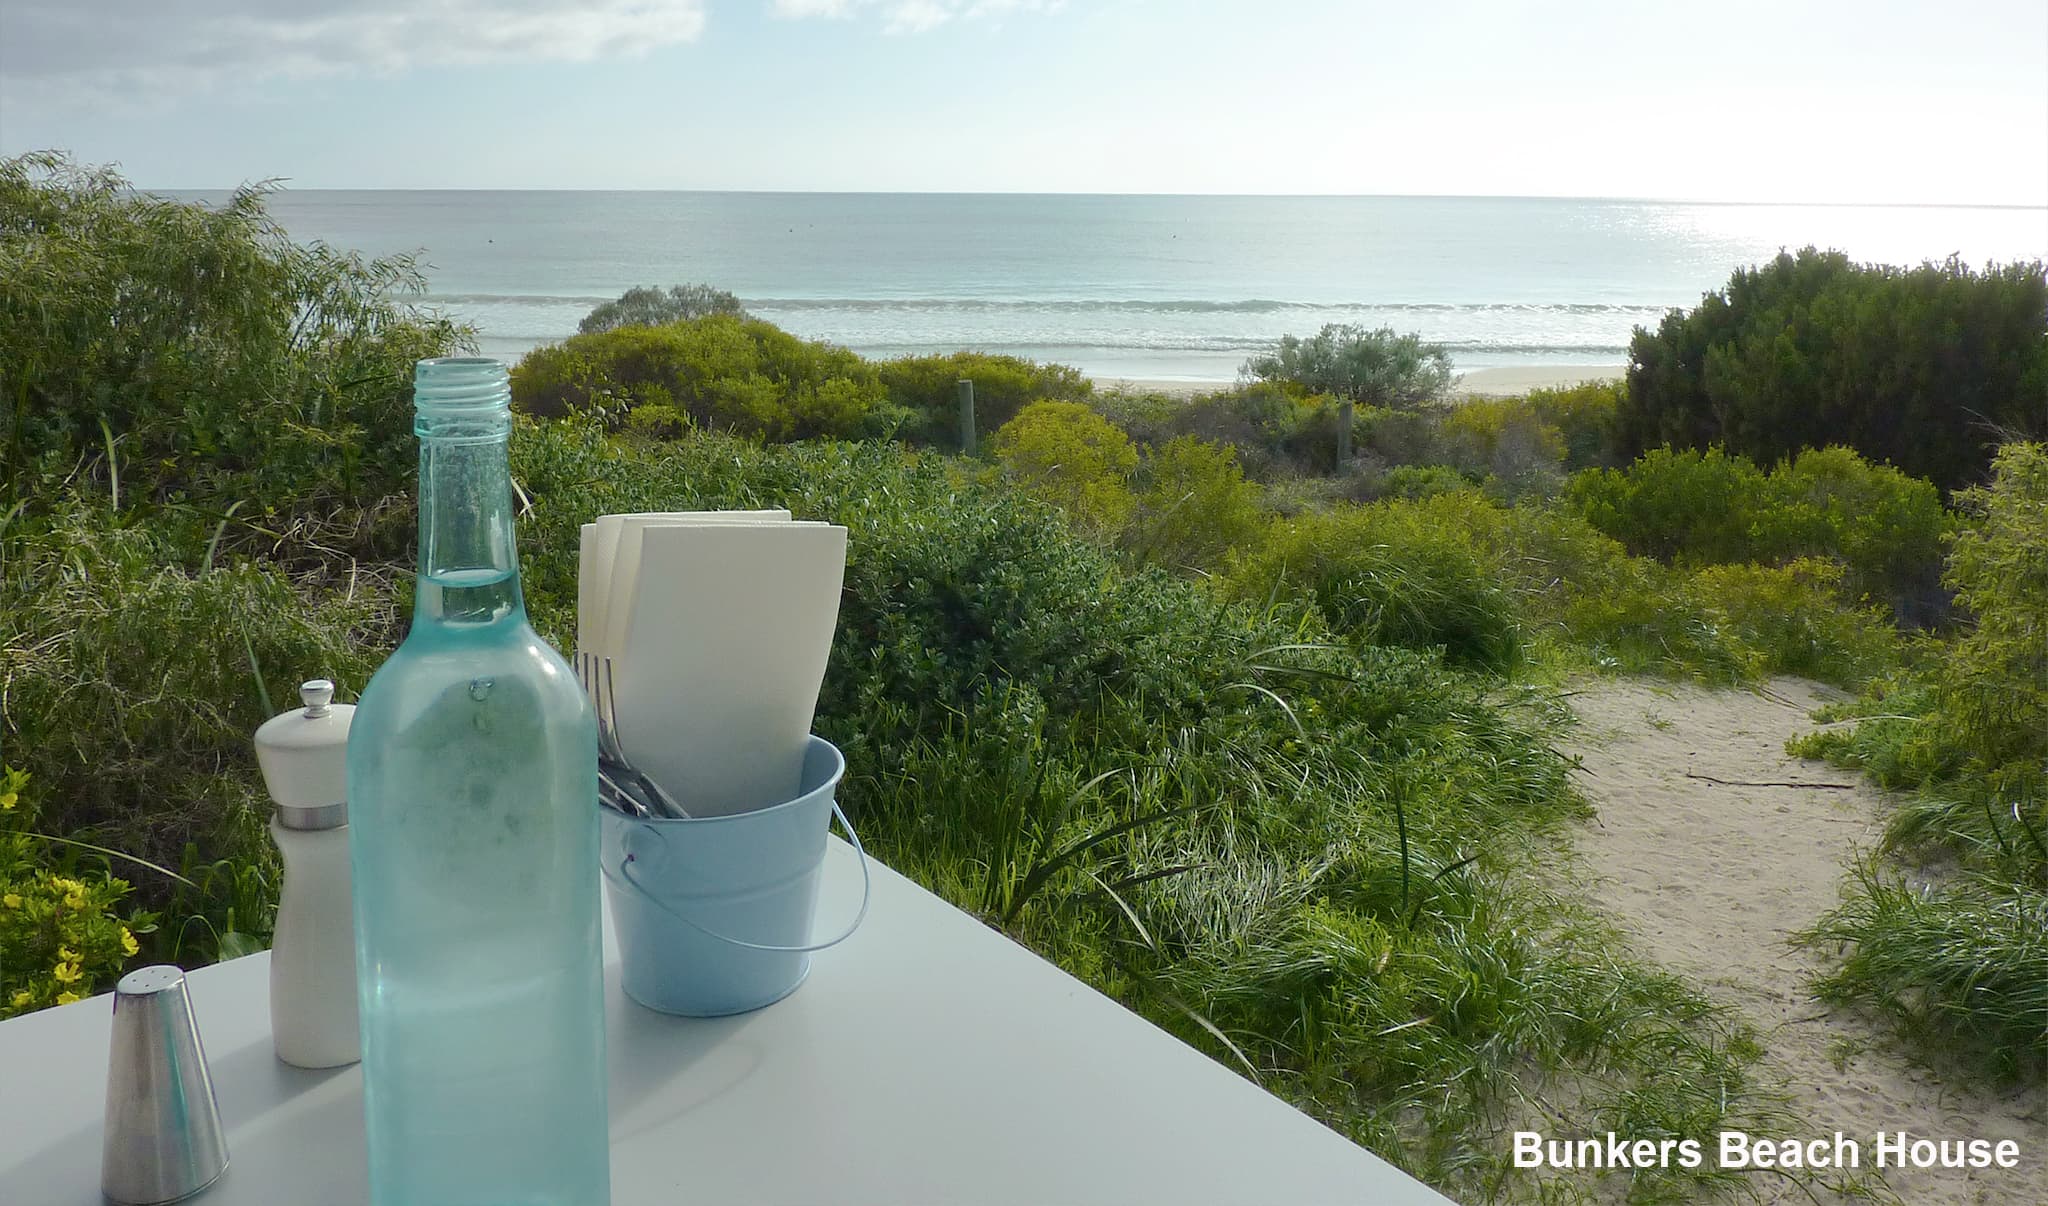 Bunkers beach house Margaret River